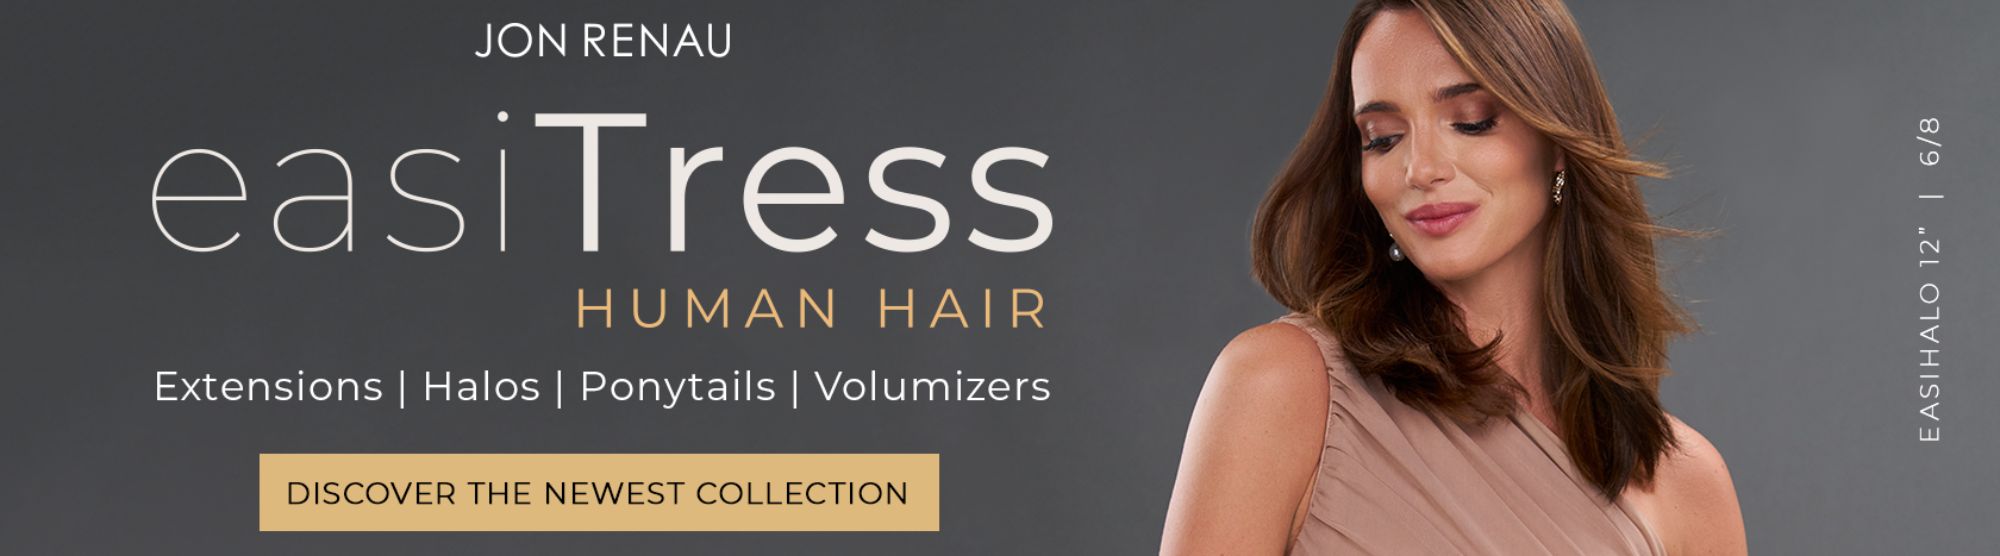 New human hair extensions, halos, and volumizers from Jon Renau on sale today!